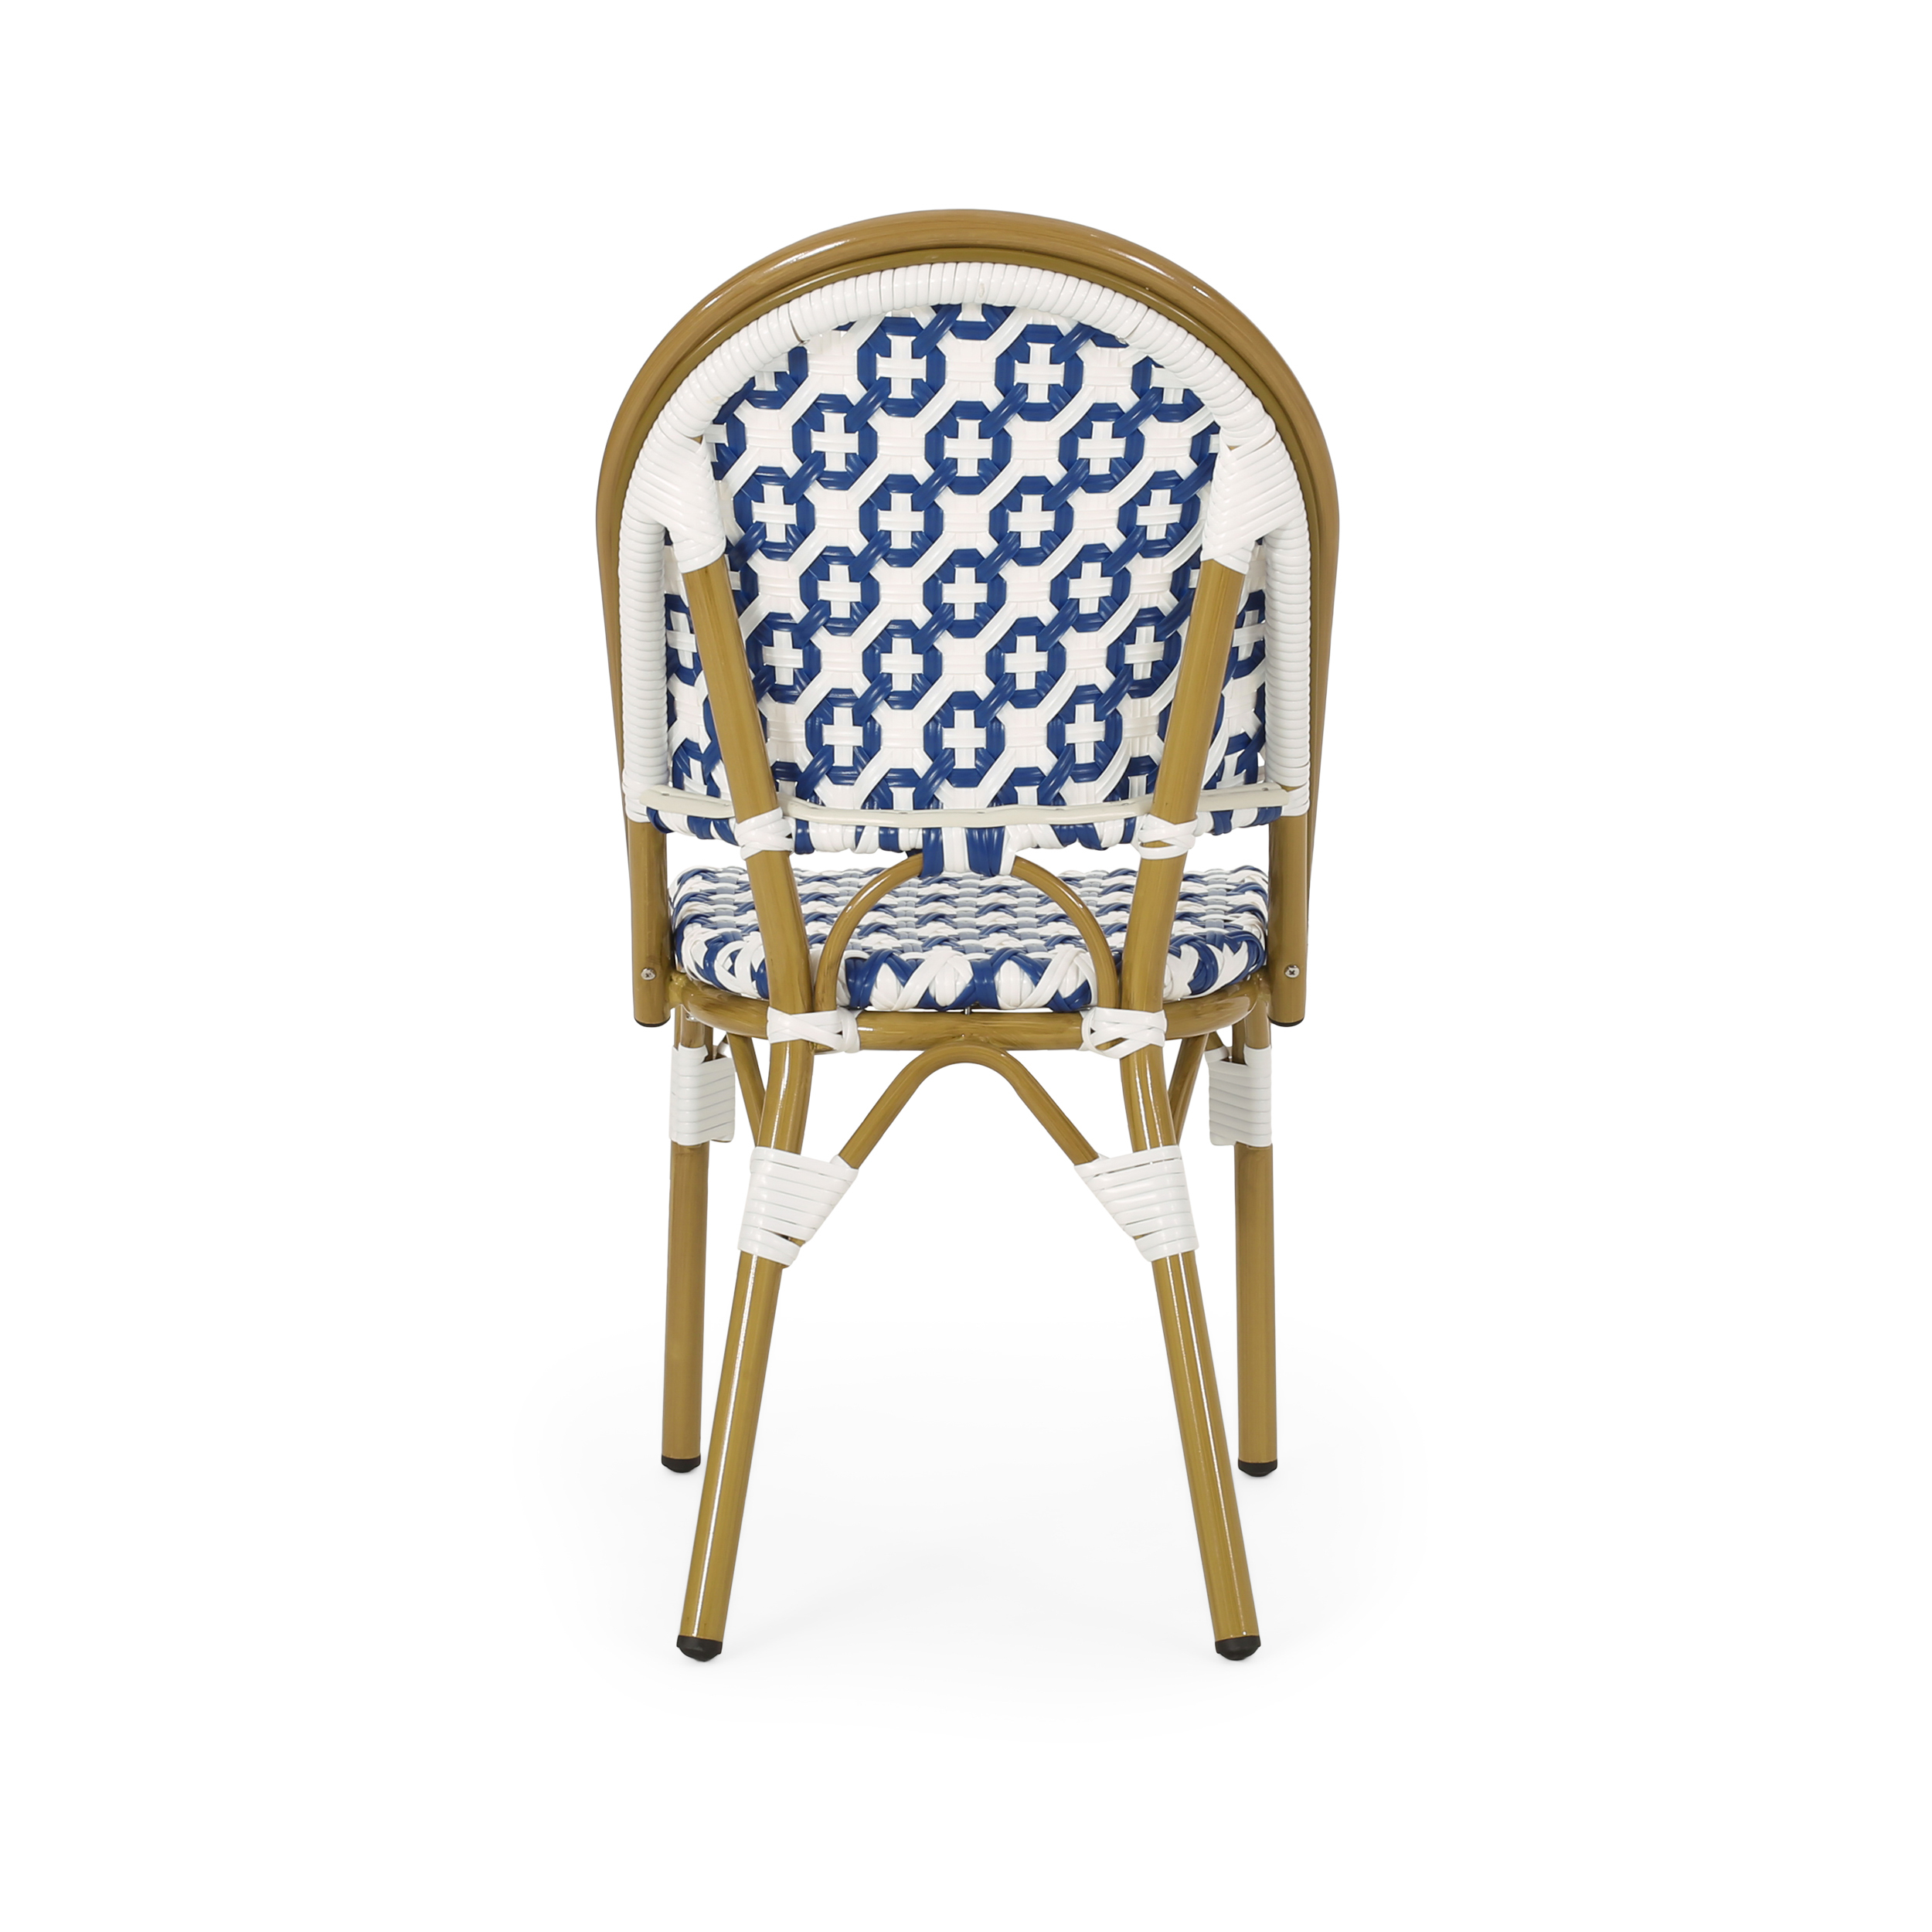 Brandon Outdoor French Bistro Chair, Set of 2, Blue, White, Bamboo Finish - image 4 of 8